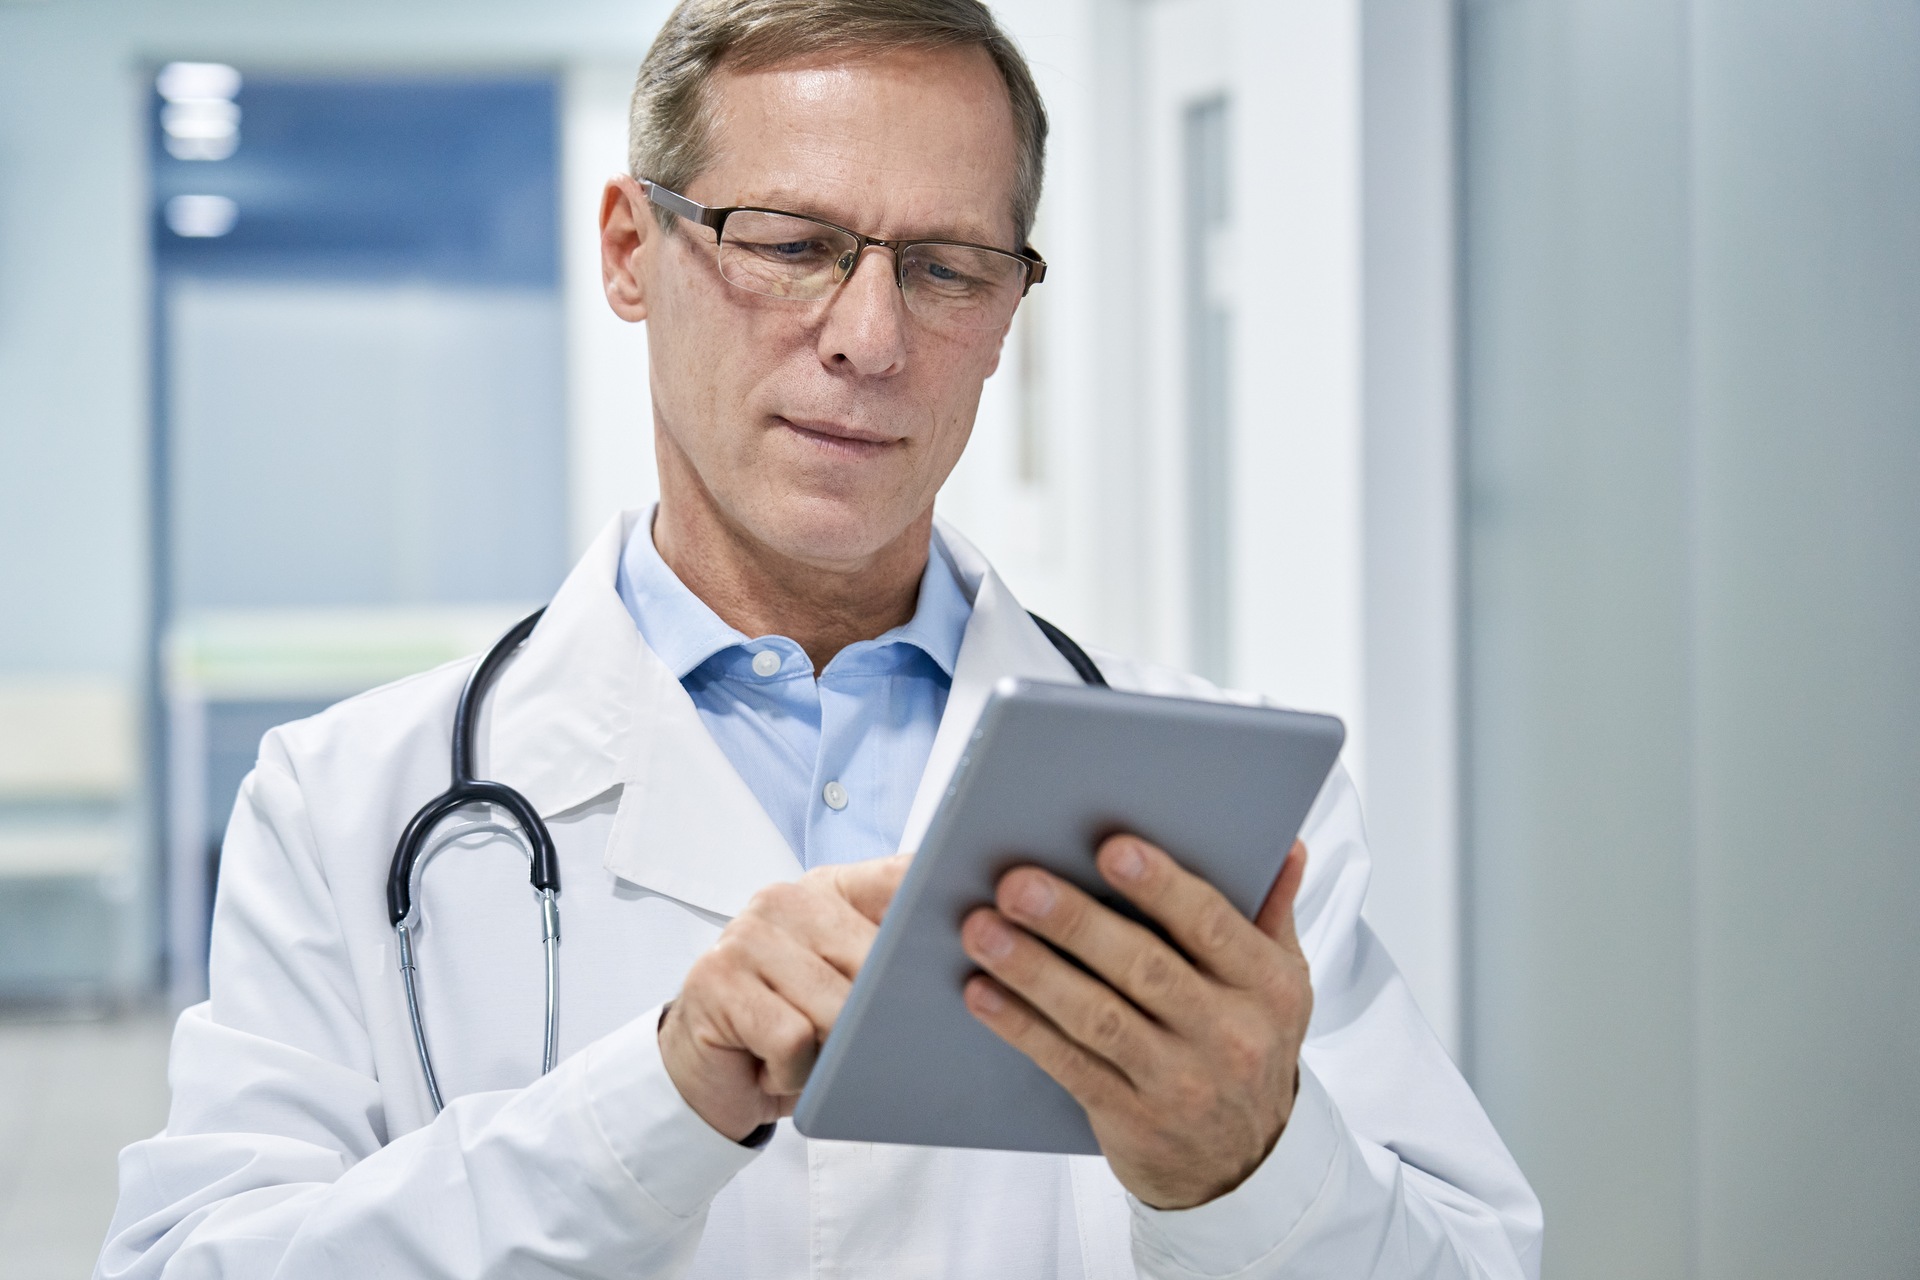 Healthcare digitization: the Swiss population wants good added value from the digital transformation in healthcare increased user-friendliness, better diagnosis and treatment and lower healthcare costs